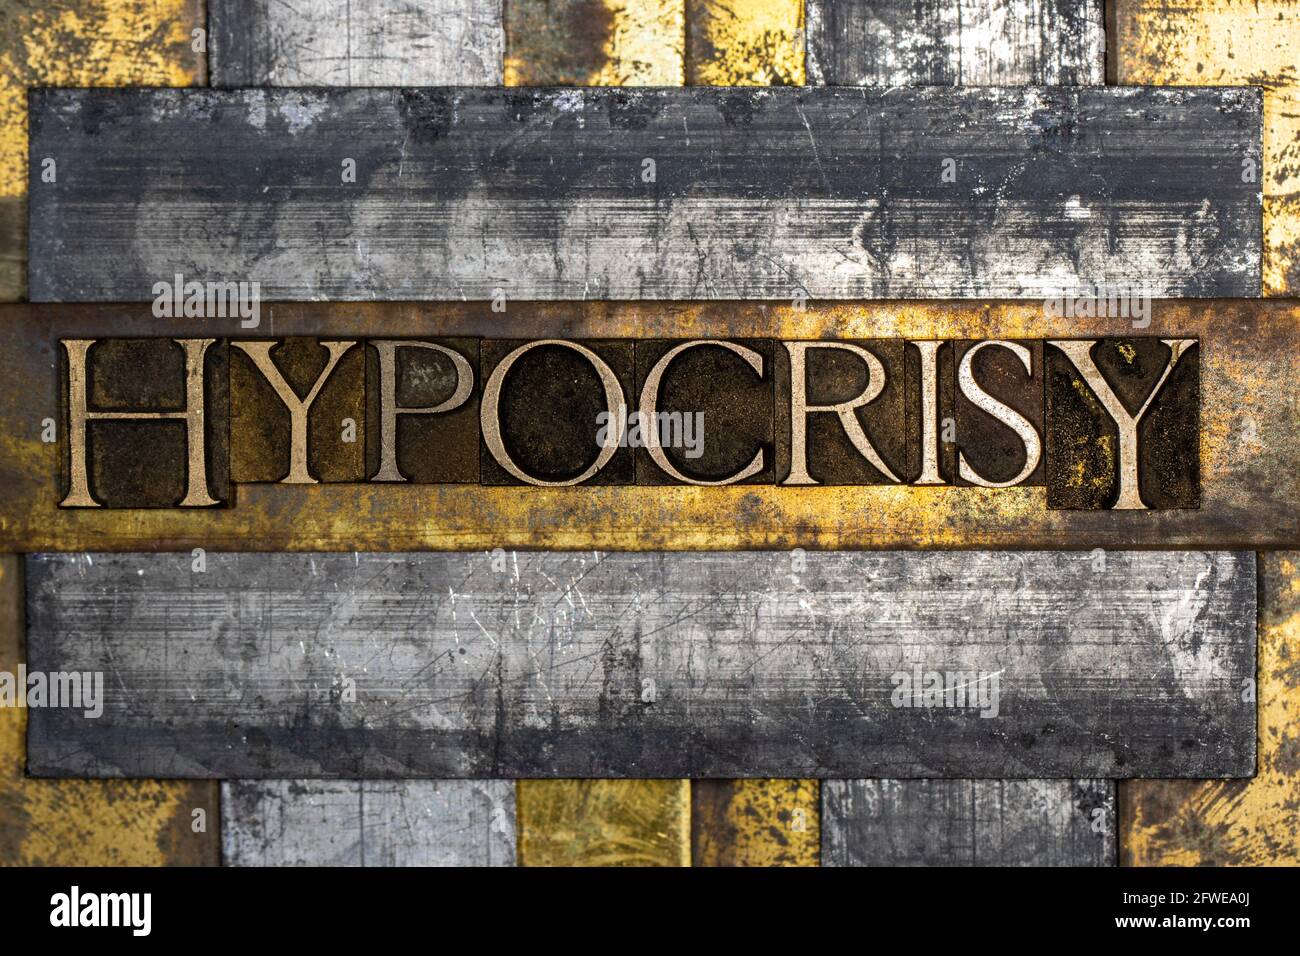 Hypocrisy text on vintage textured grunge copper and gold background Stock Photo